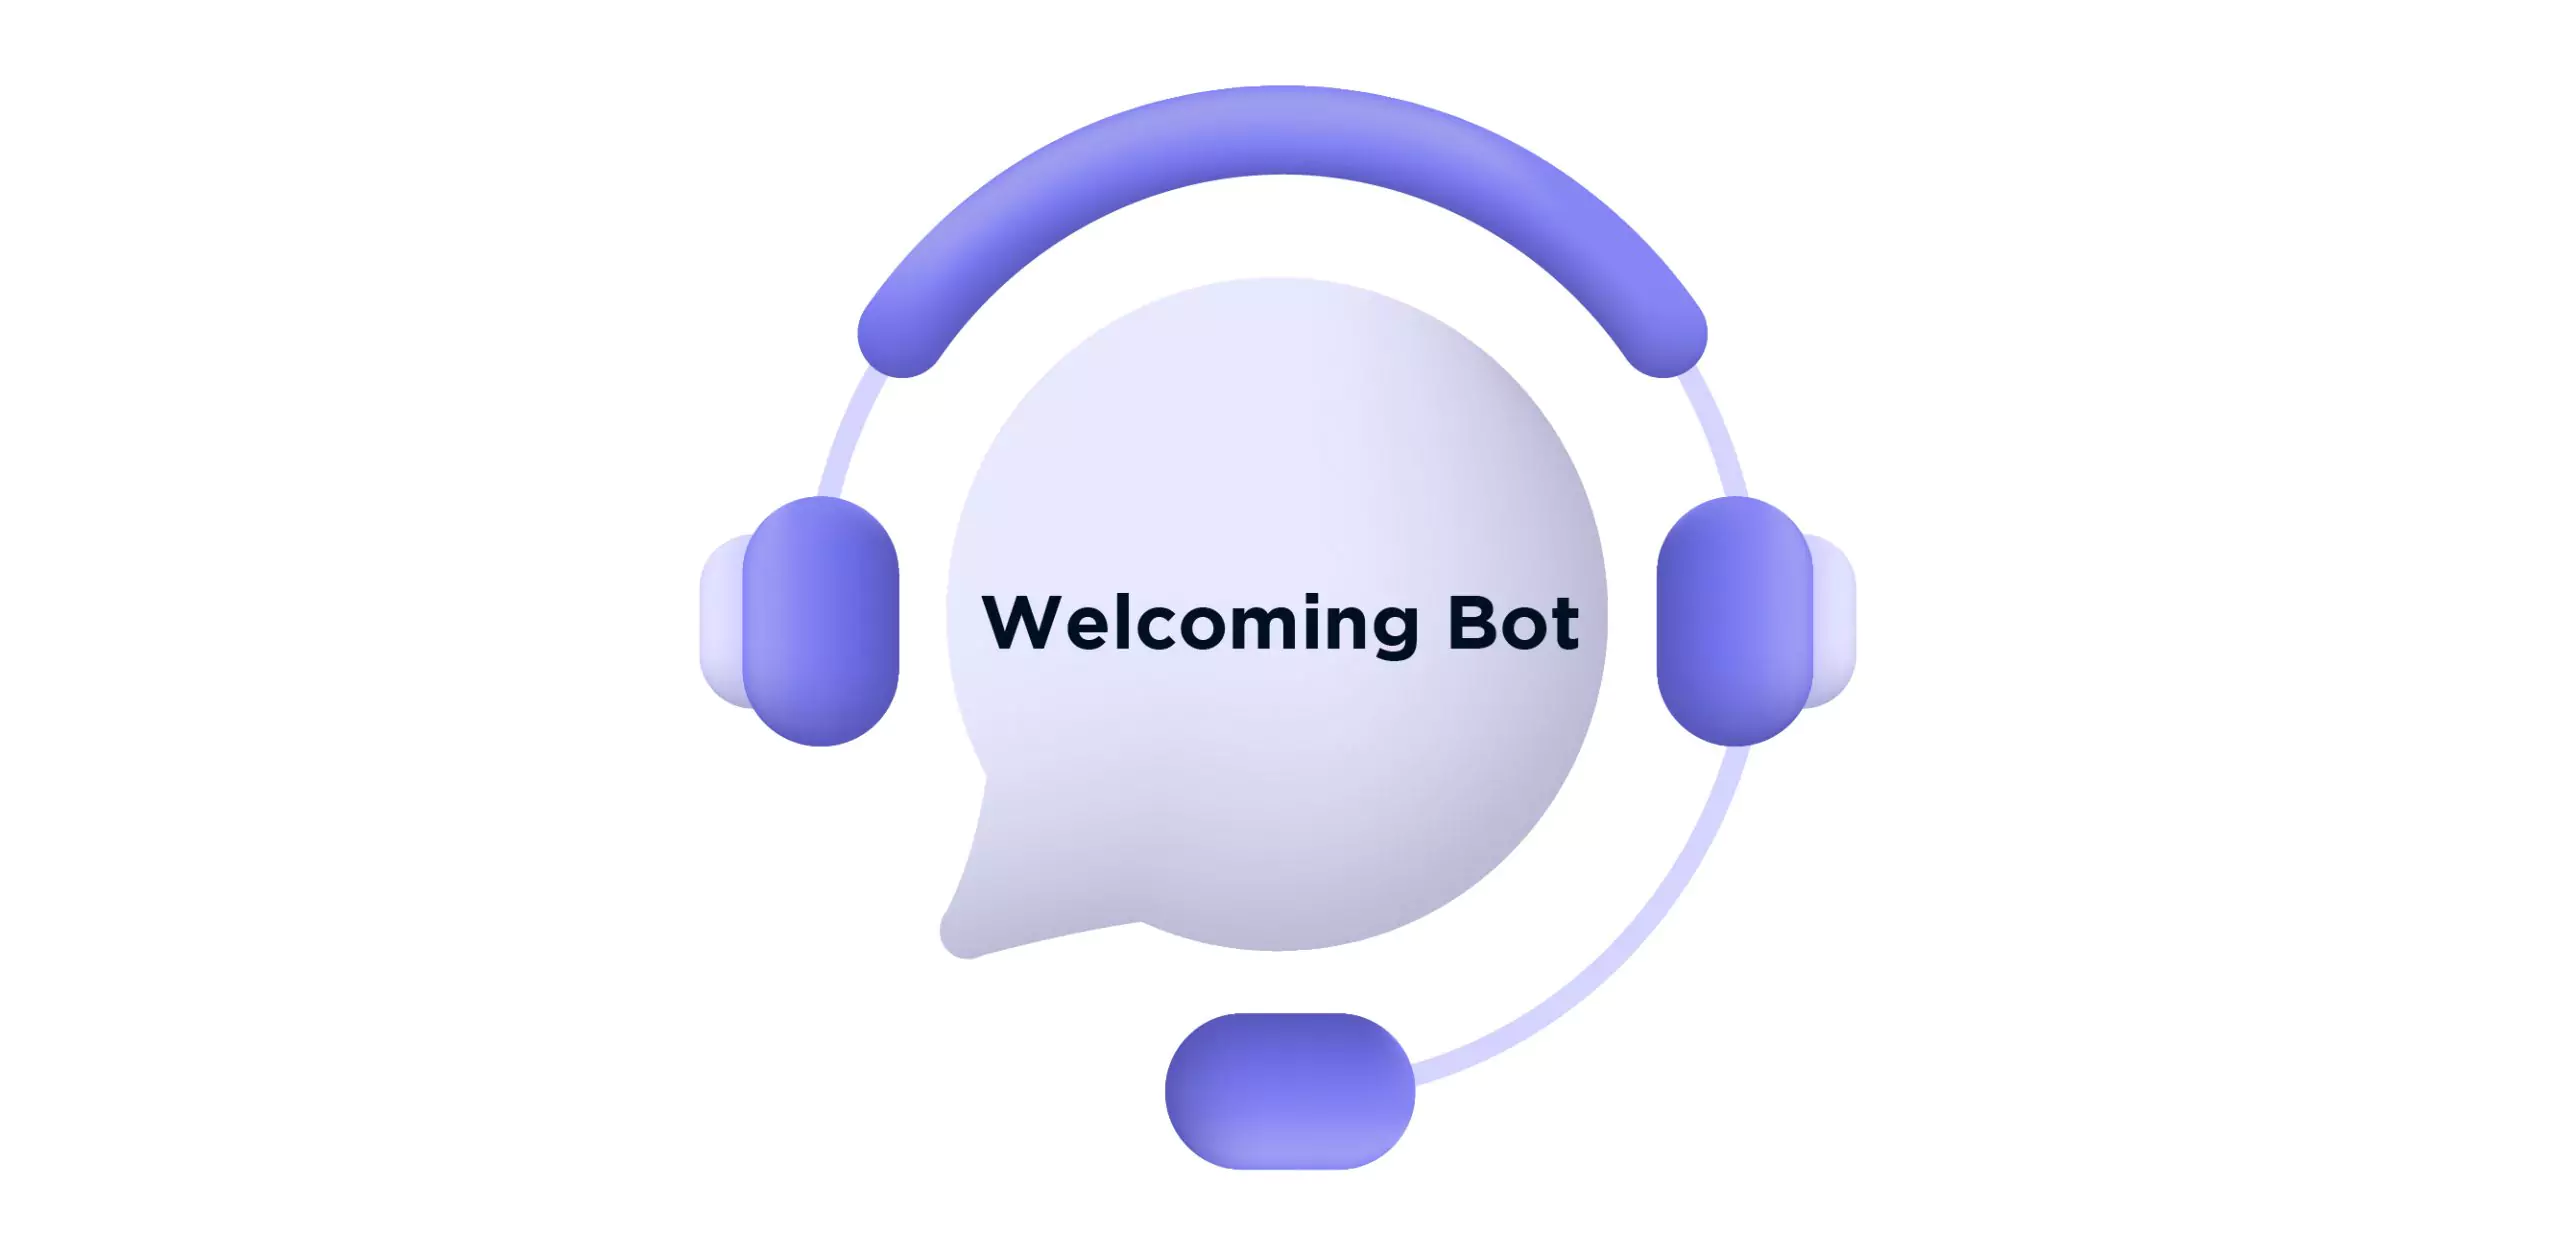 How to use MEE6 as Welcoming Bot?